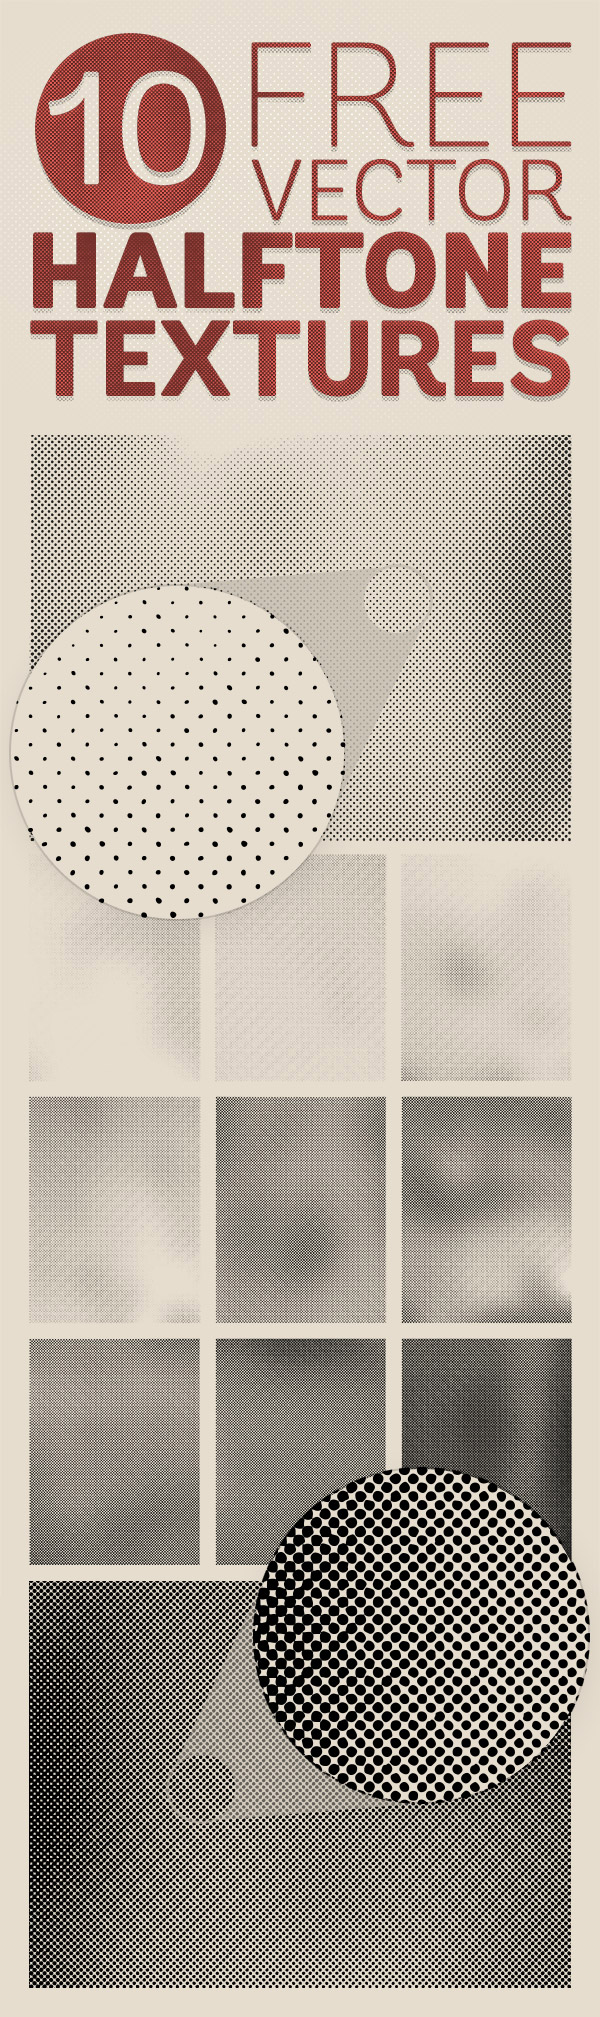 Free Halftone Textures Pack of 10